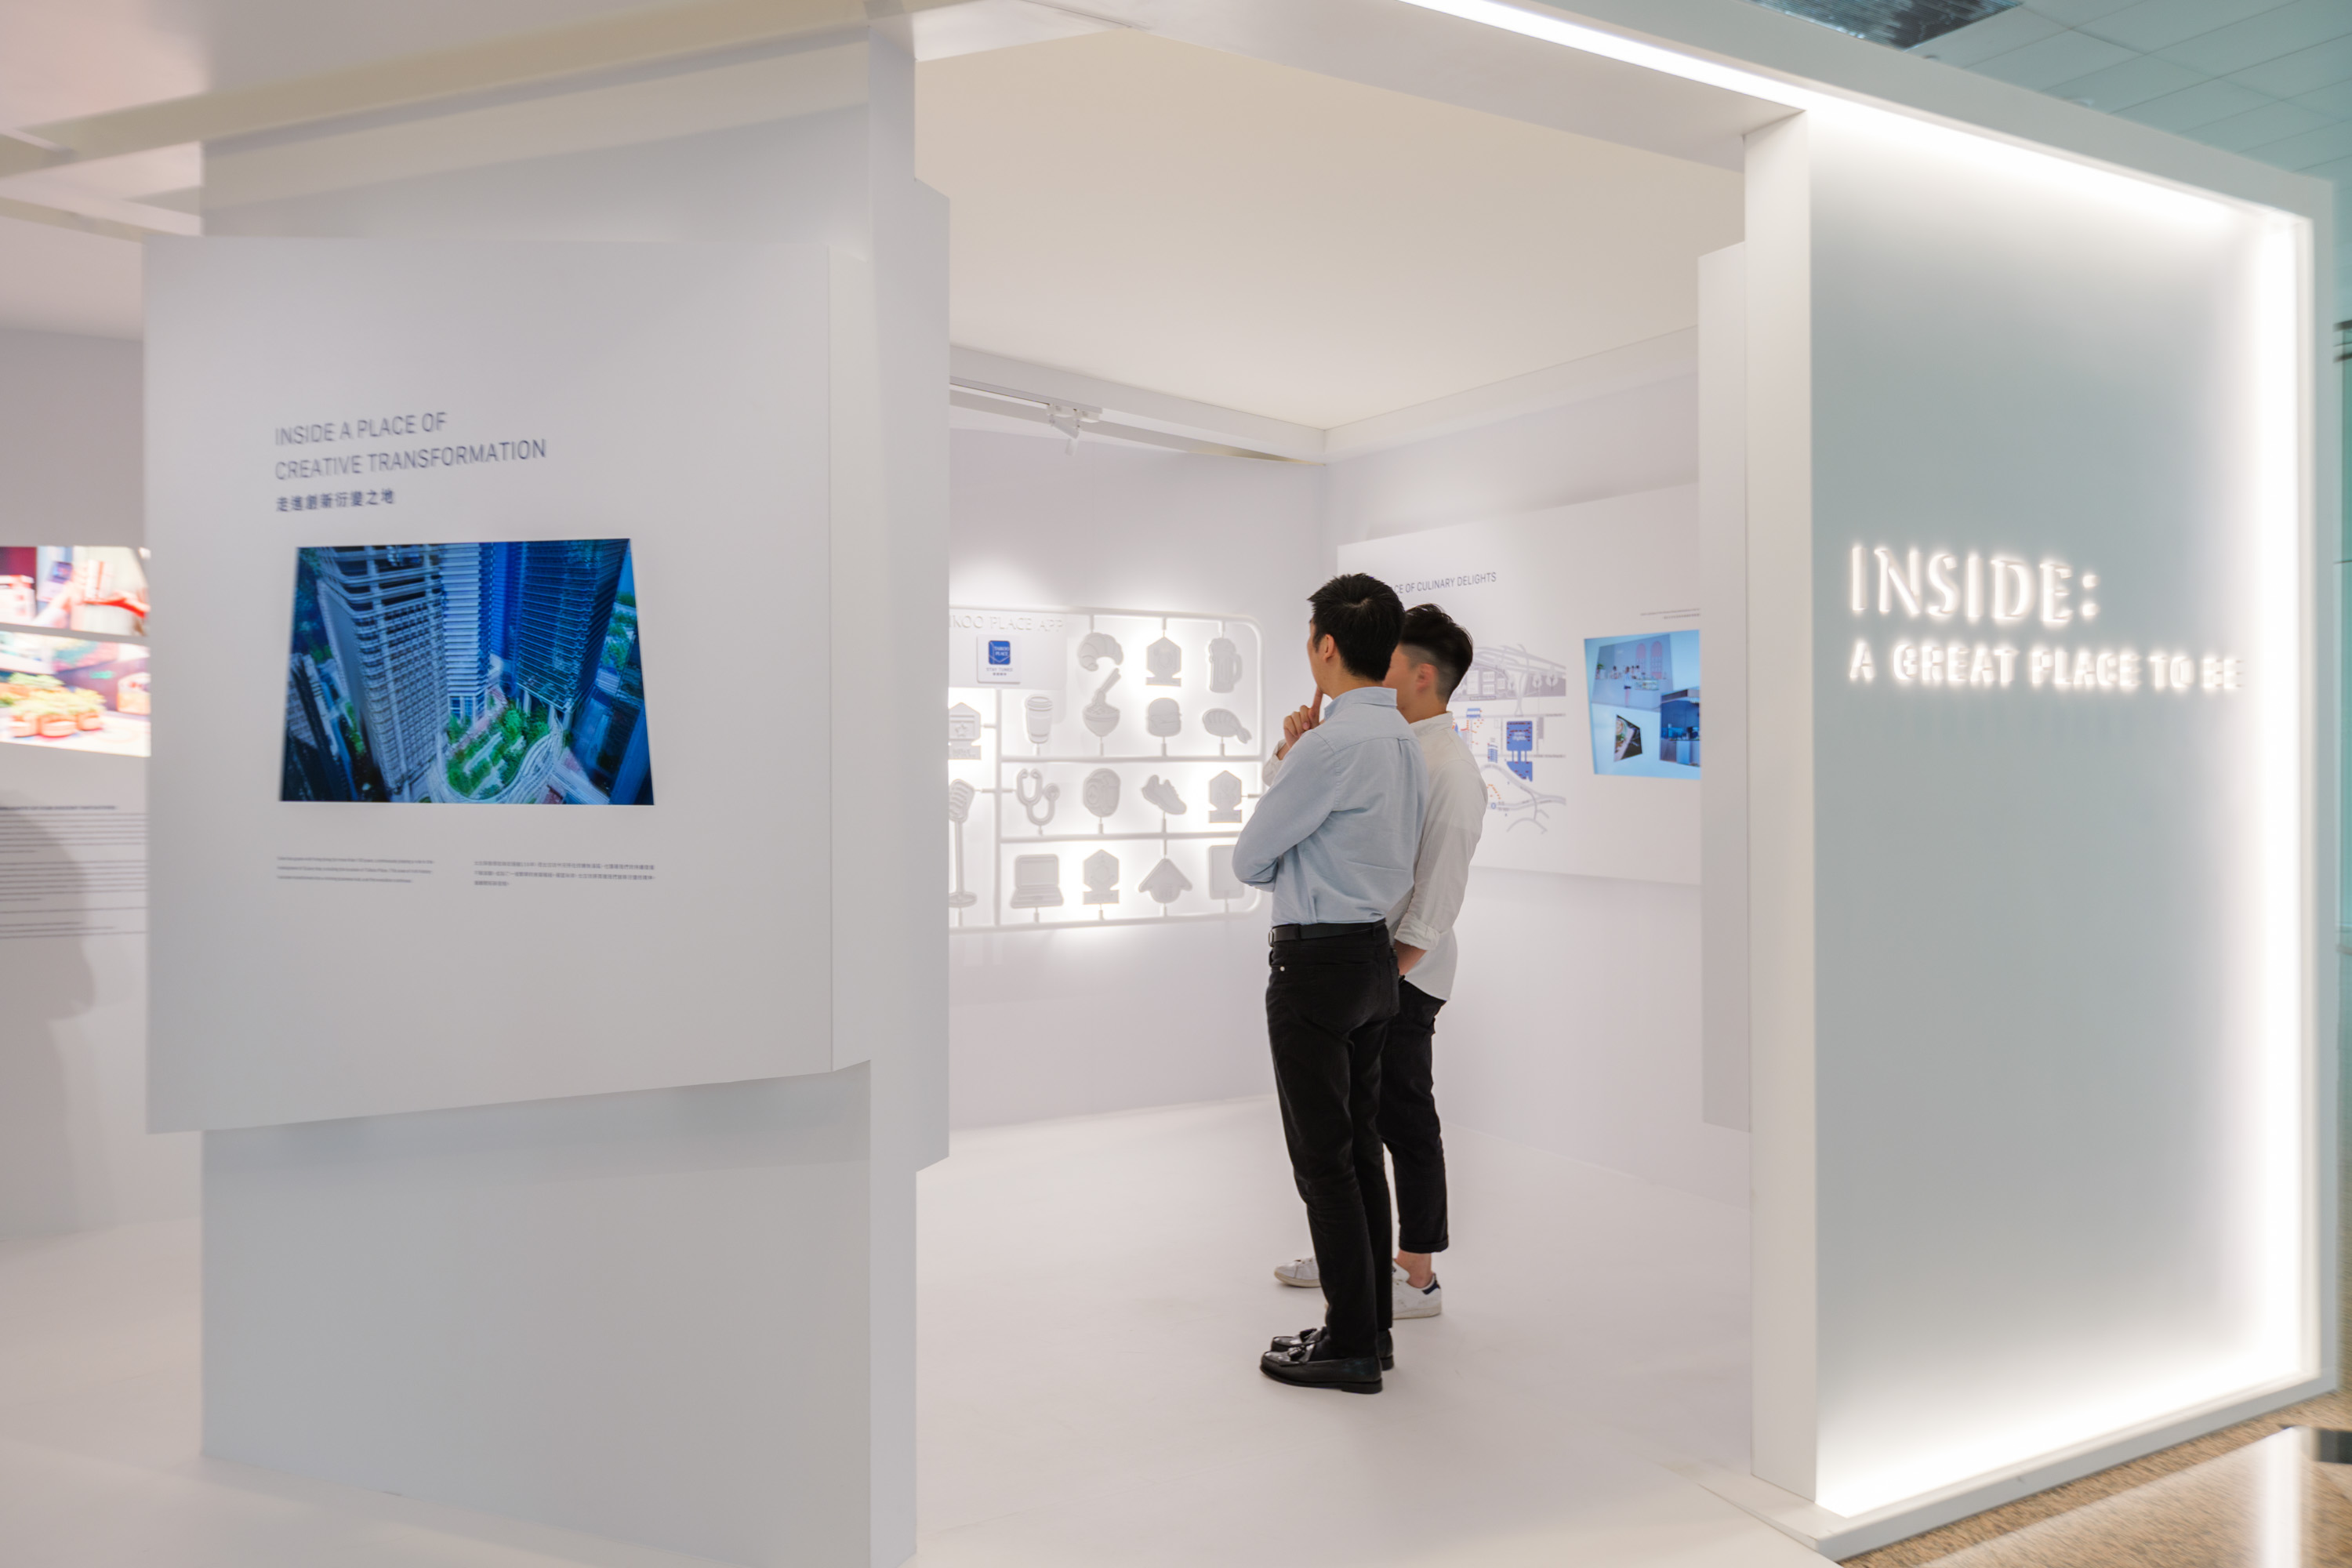 “Inside: A Great Place to Be” Exhibition